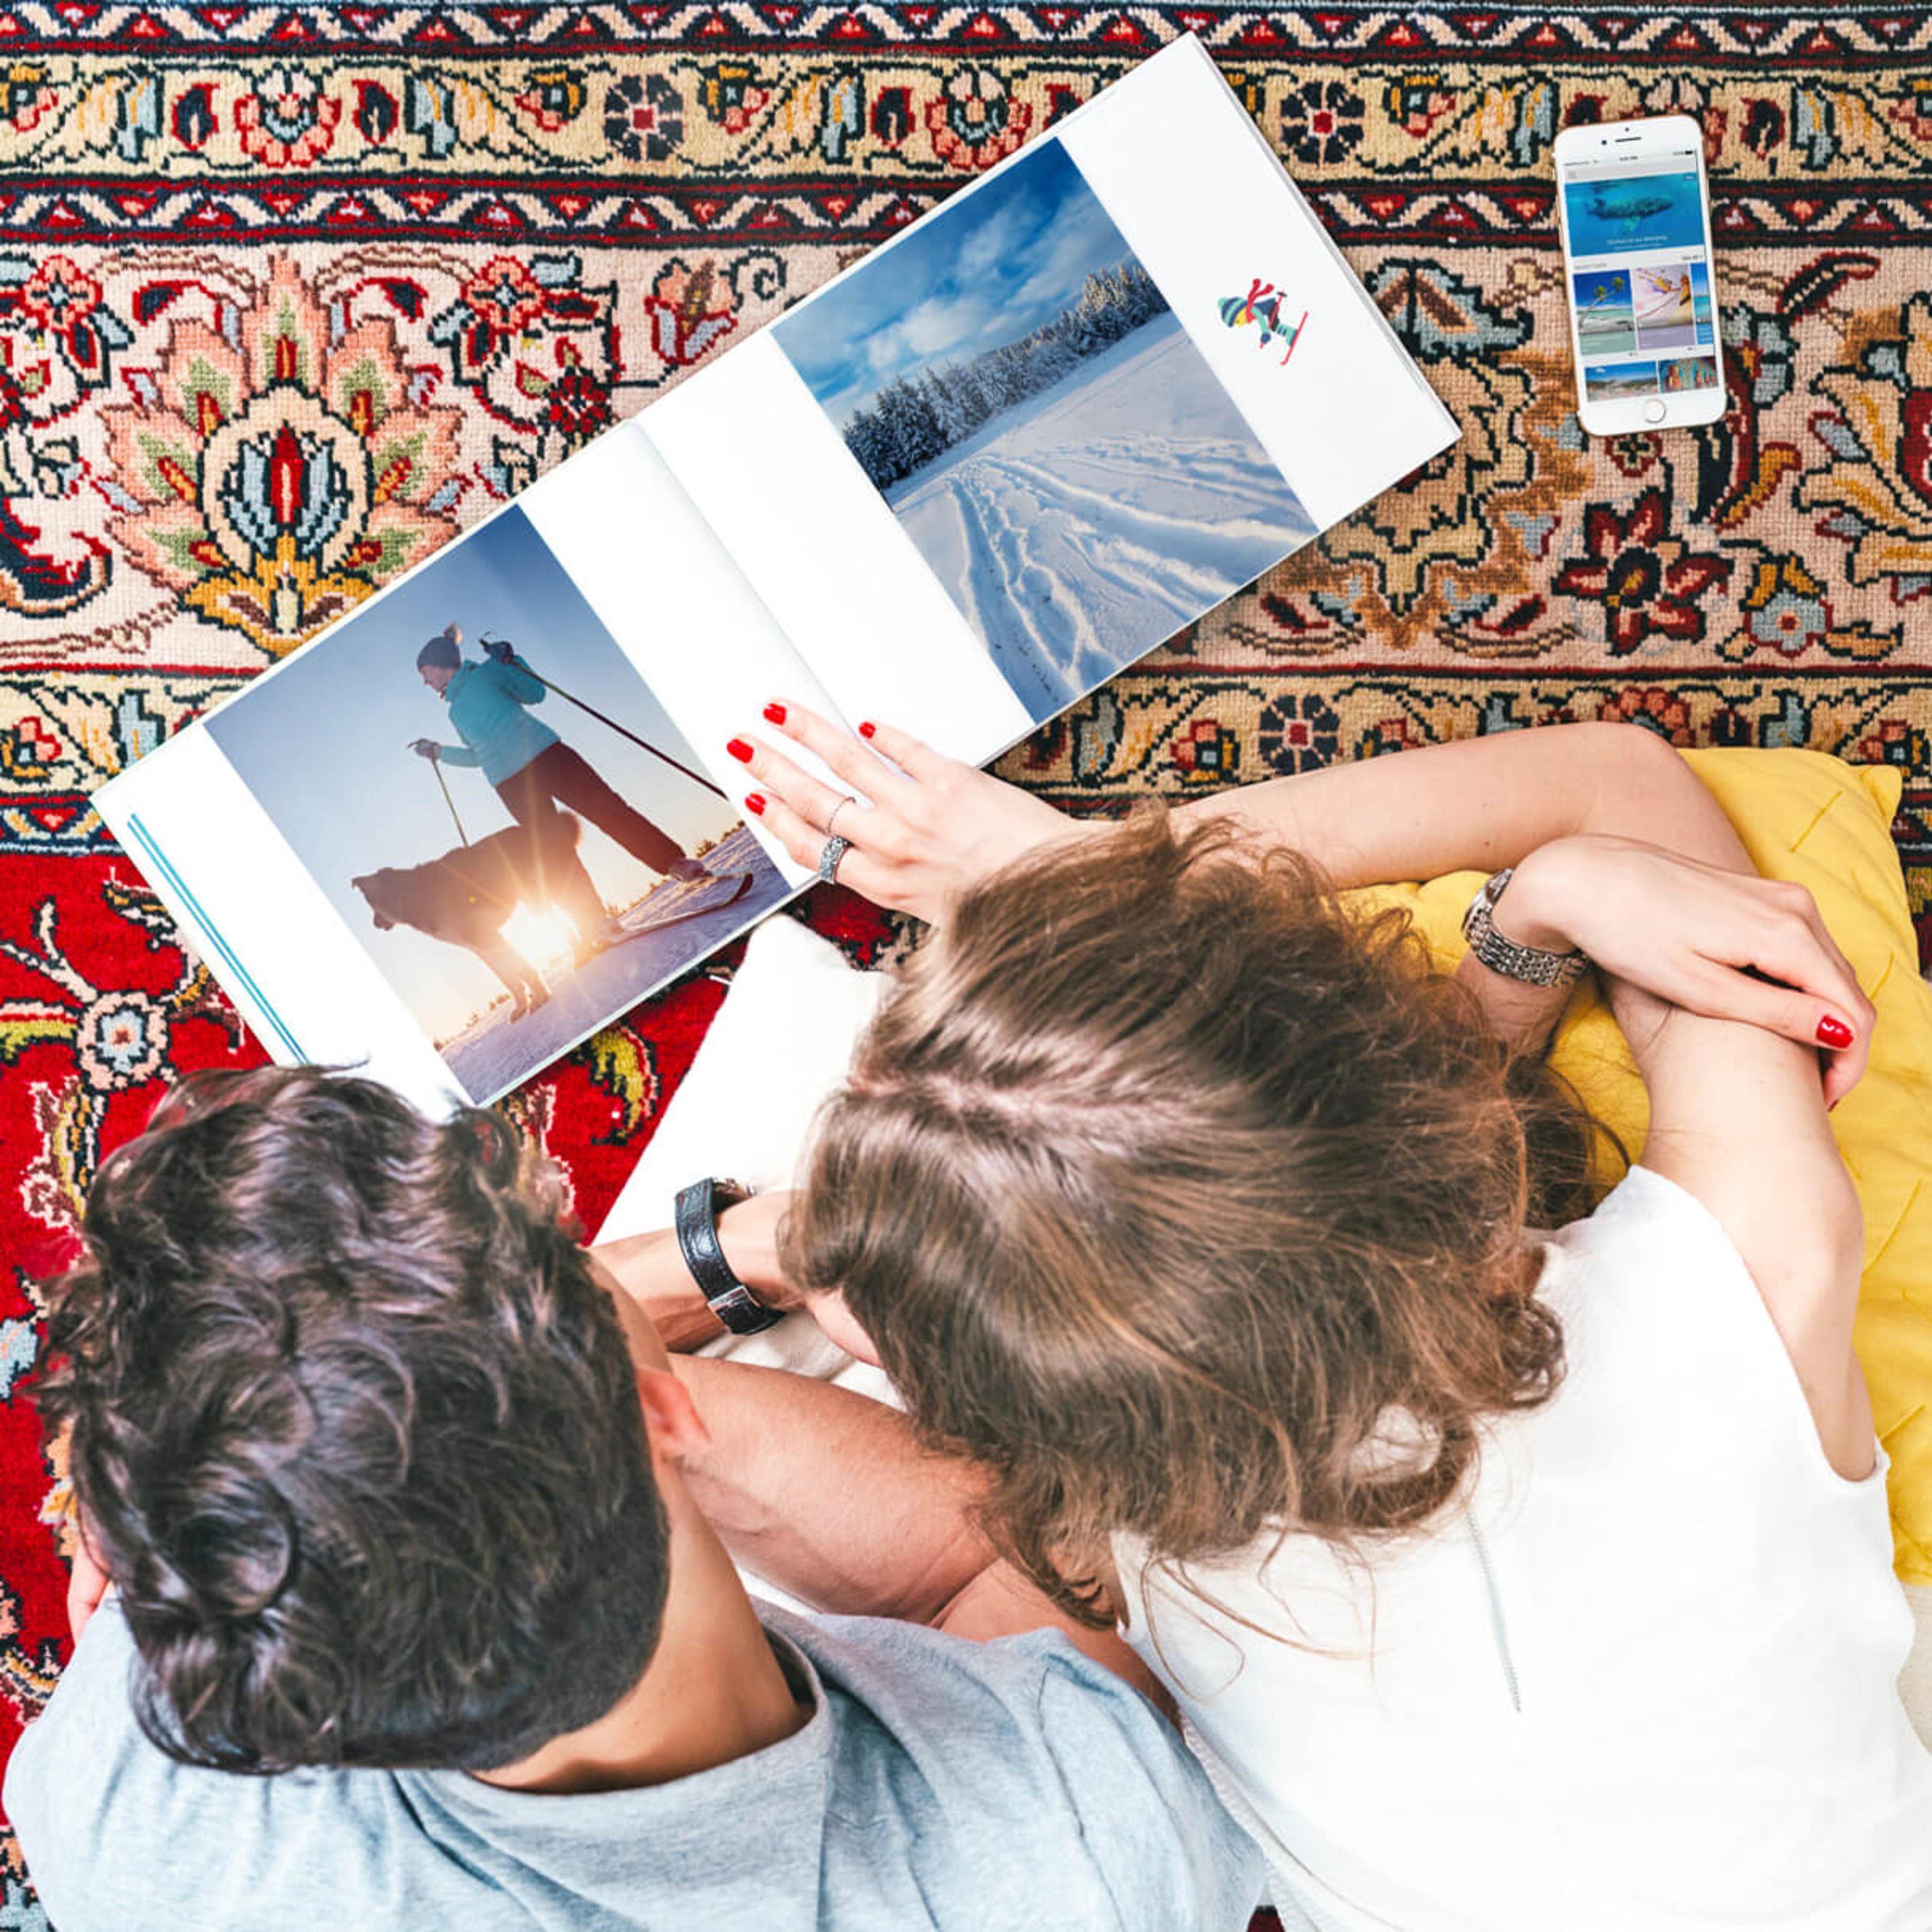 Couple in carpet, photo book with phone